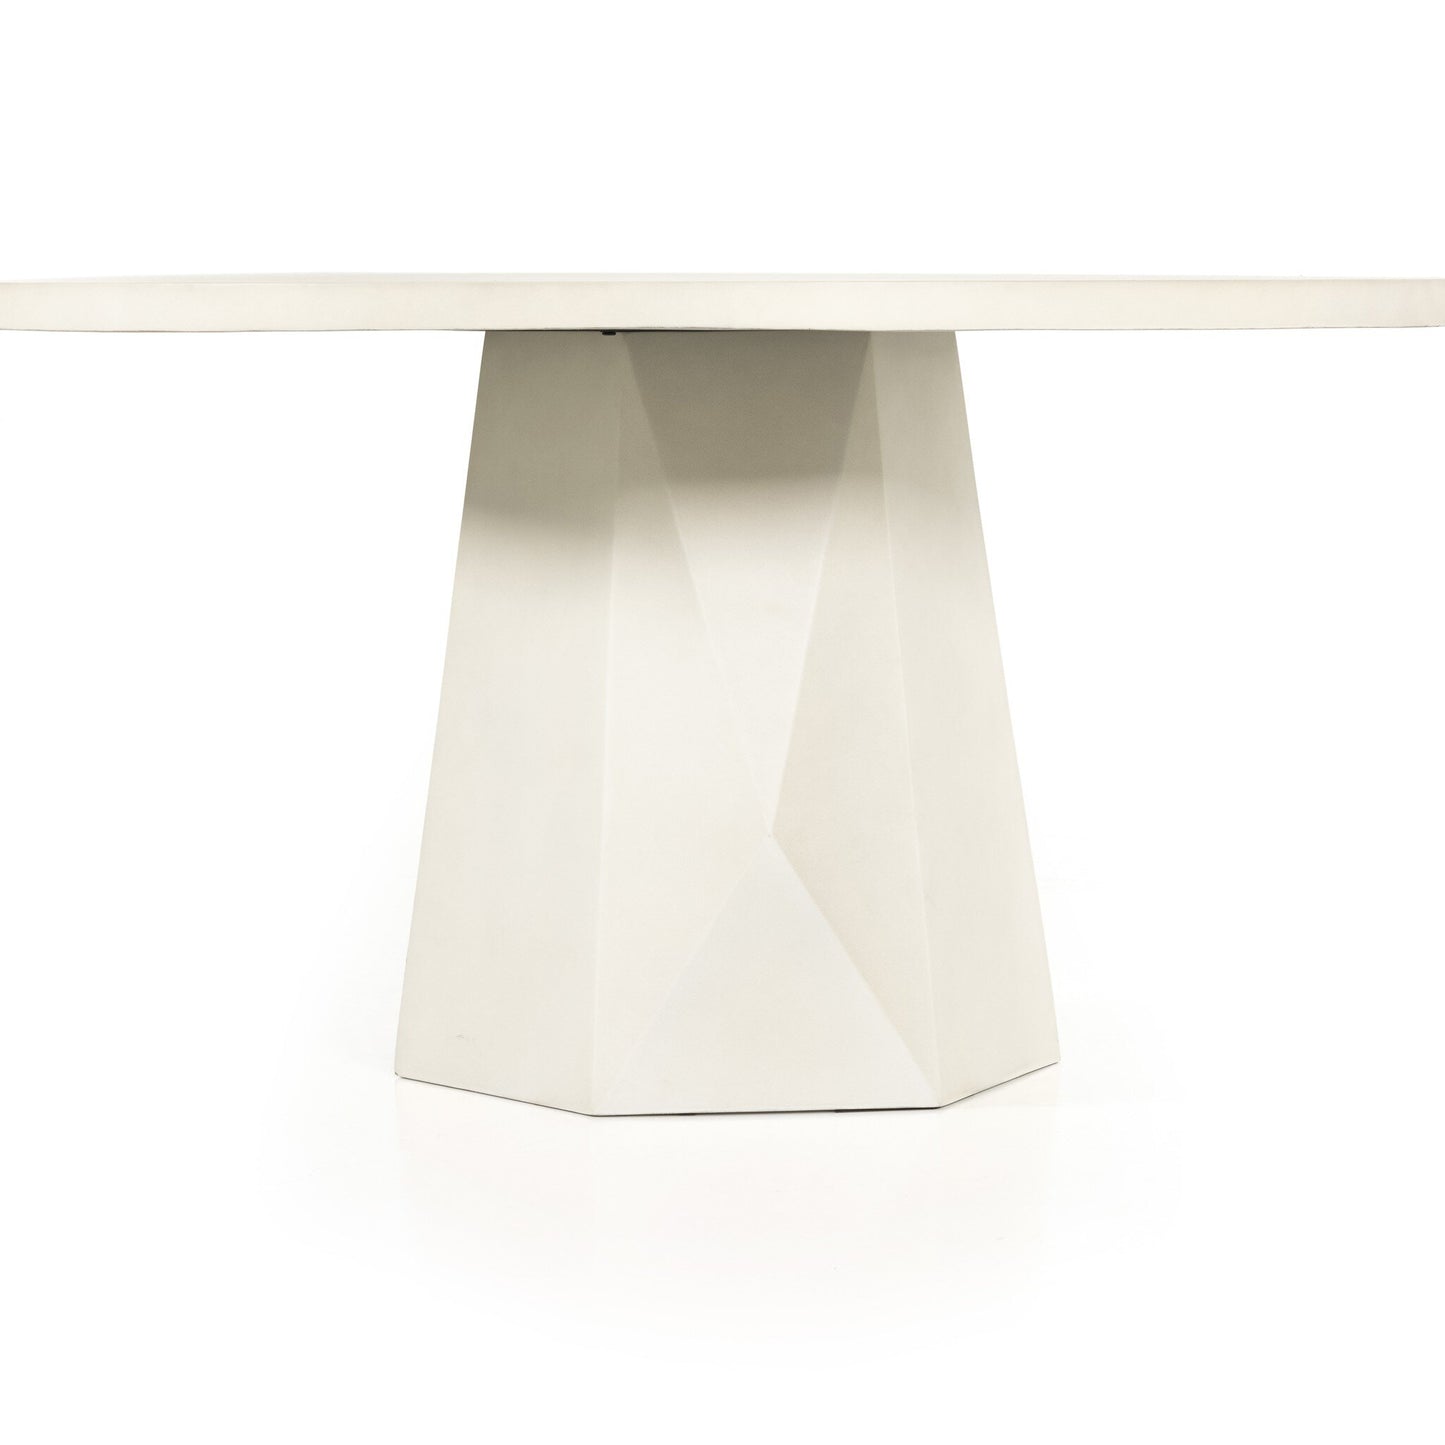 Orion Outdoor Dining Table